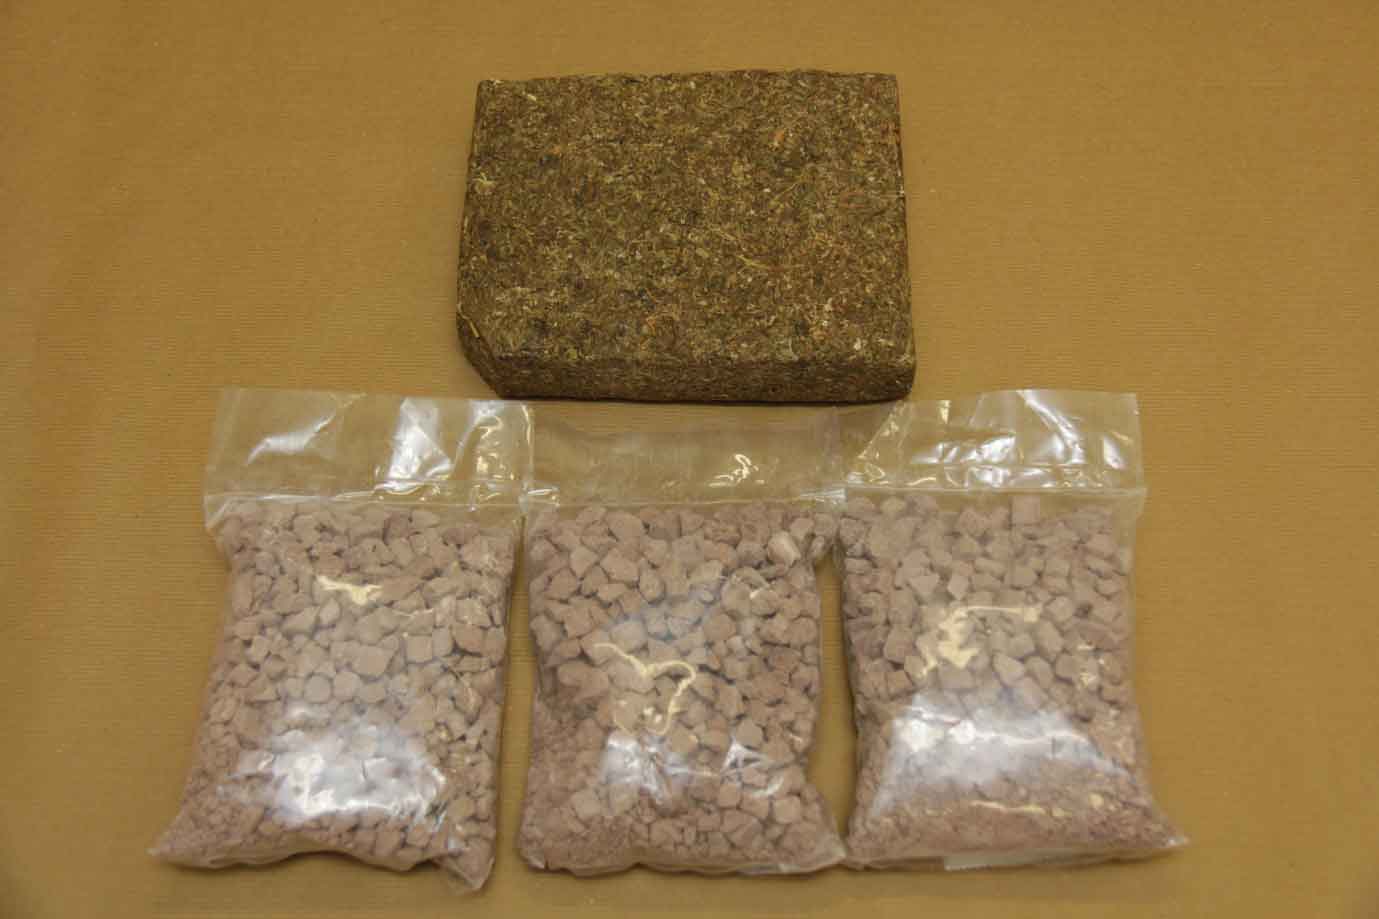 Cannabis and heroin seized at Woodlands Checkpoint on 4 Dec 2015